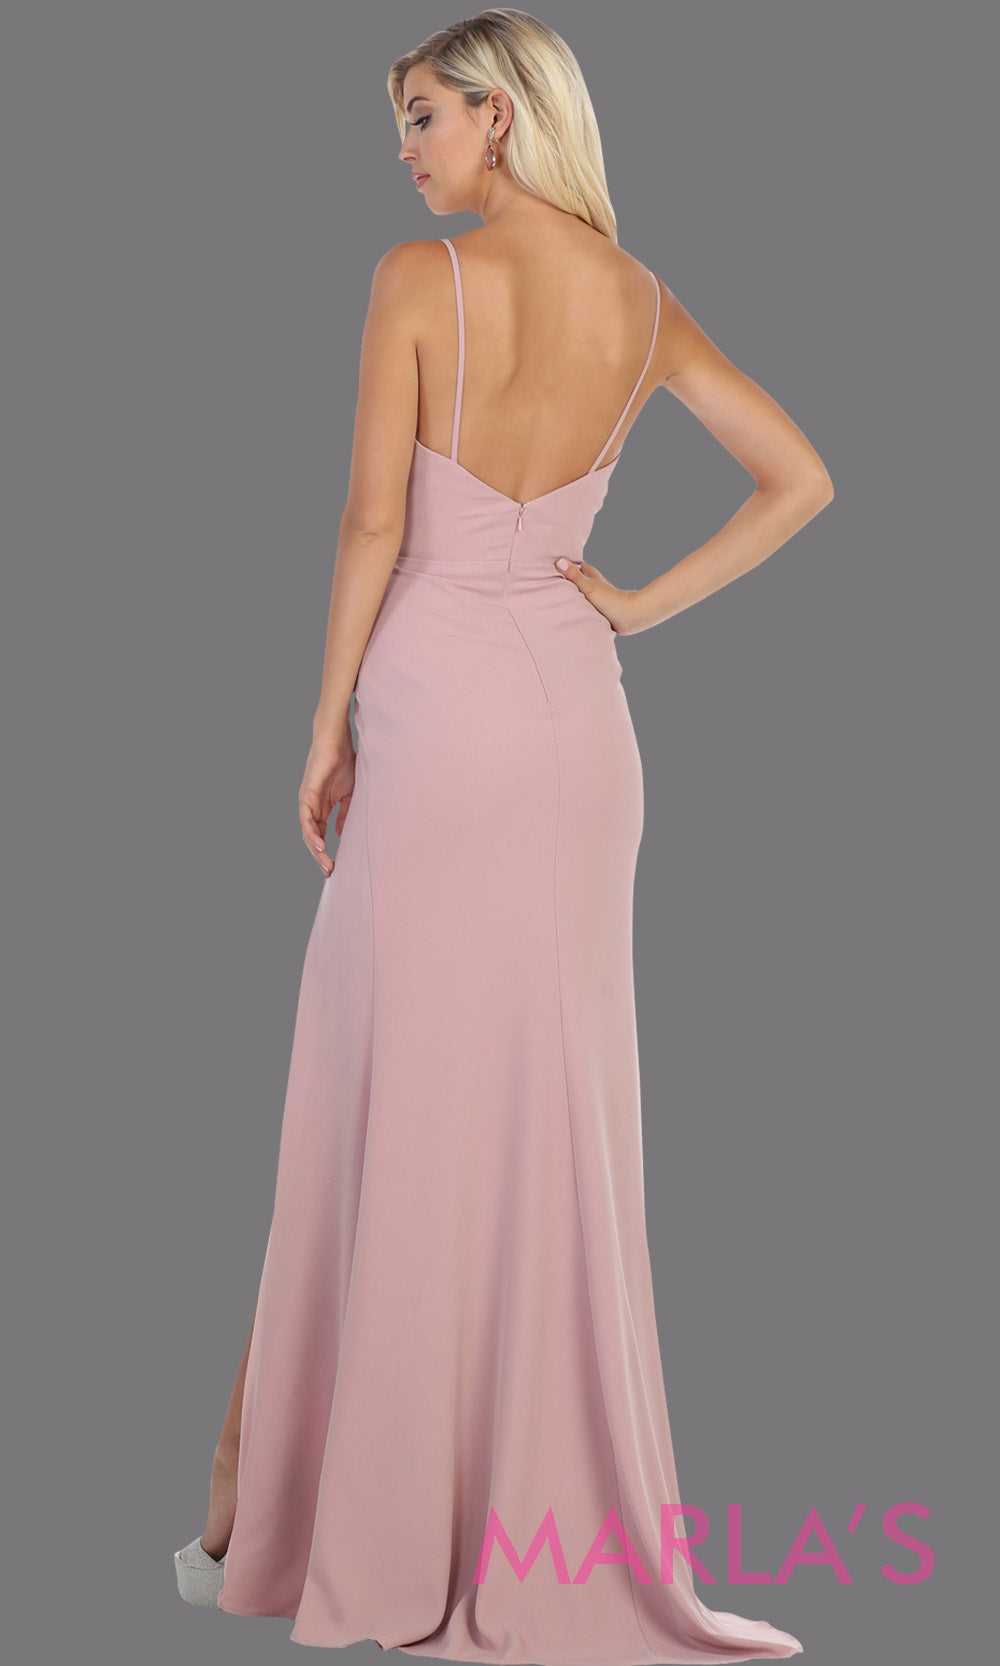 Back of Long sleek & sexy mauve evening dress with high slit & v neck dress from mayqueen. This pink fitted evening tight fitted gown with high slit is perfect for prom, wedding guest dress, guest for prom, formal party, gala, black tie party.jpg